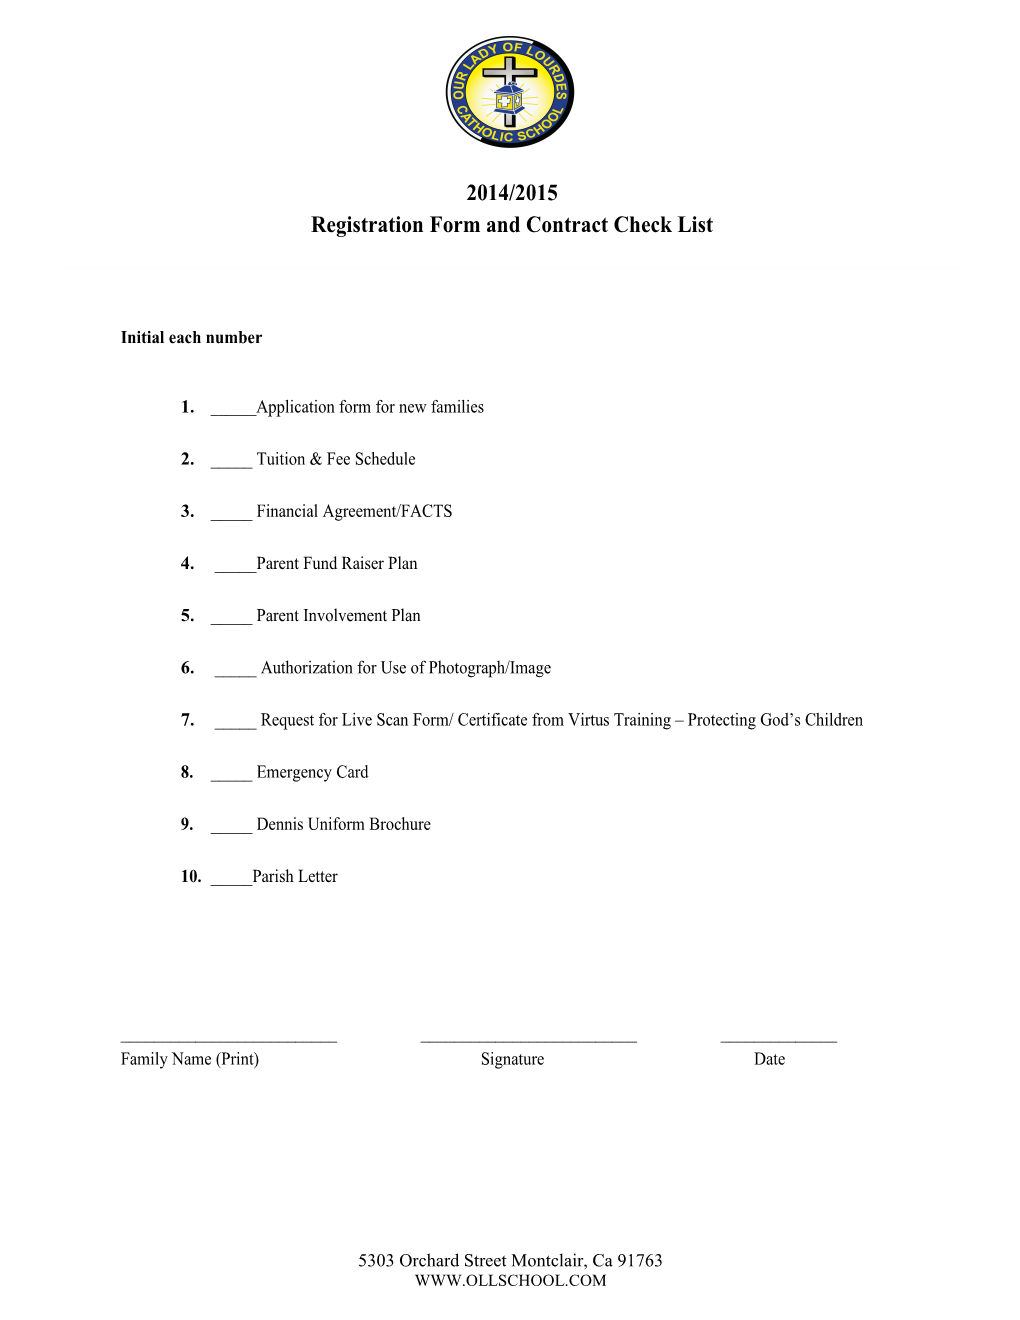 Registration Form and Contract Check List